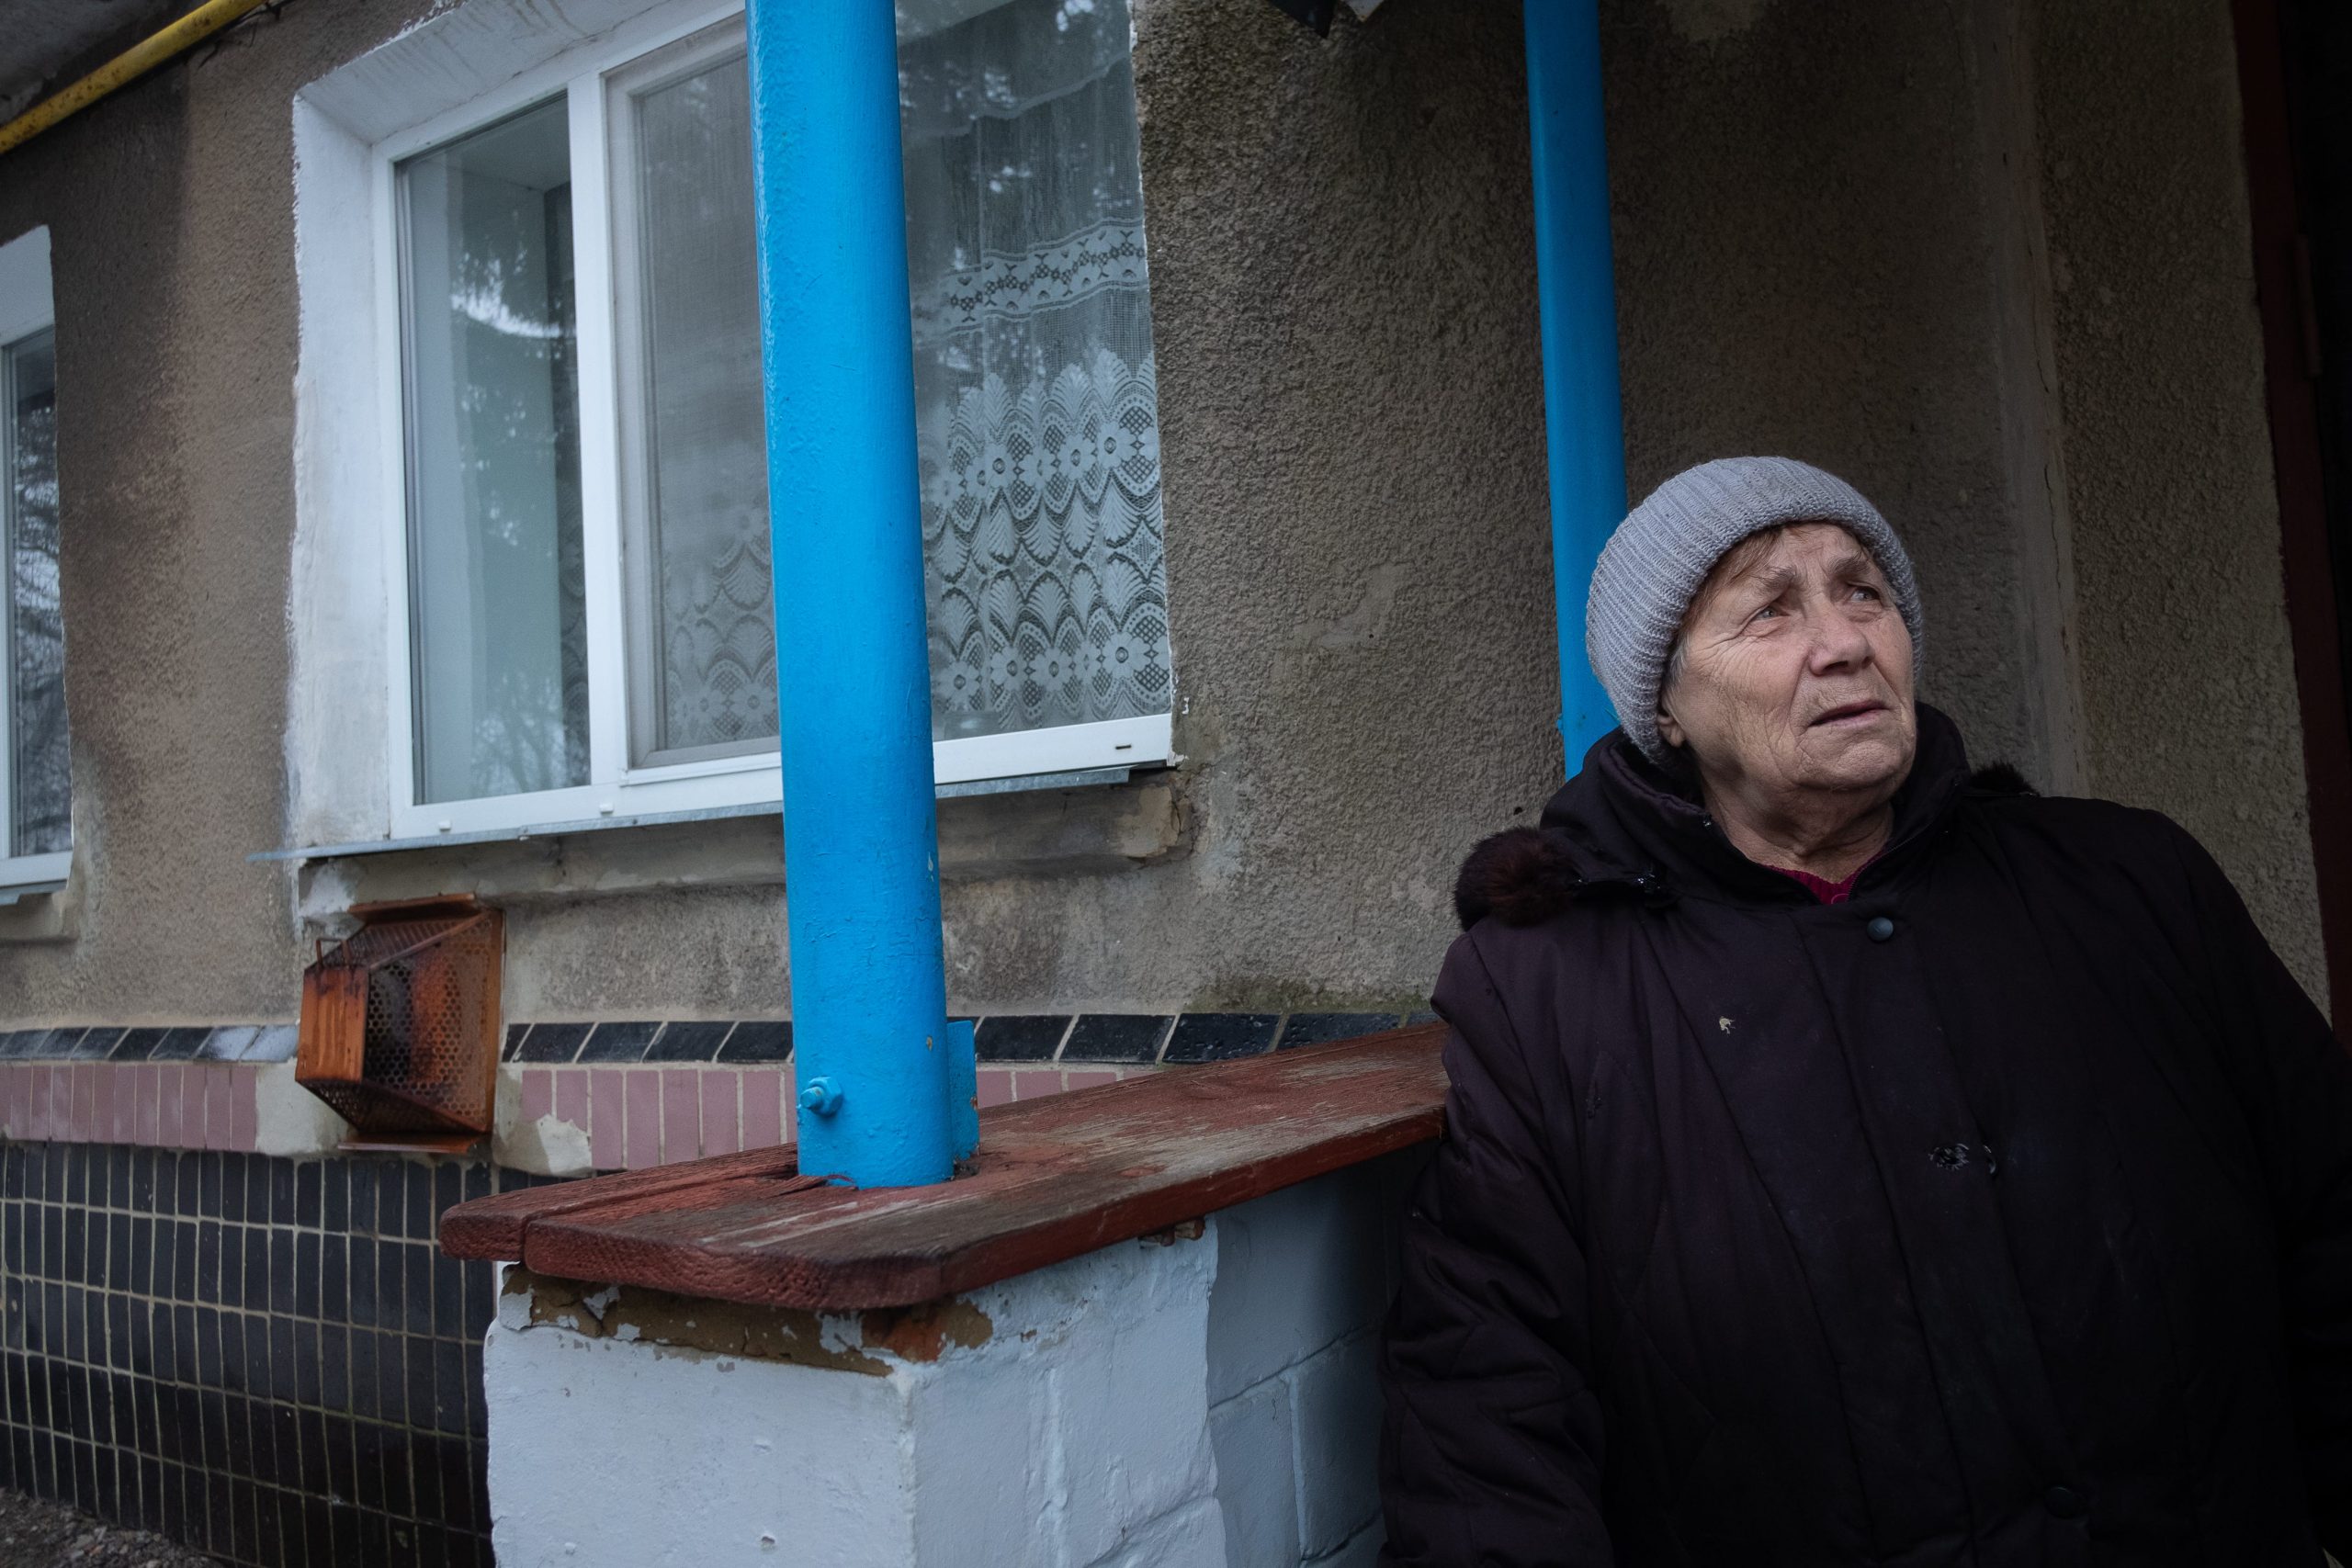 An elderly lady wearing a coat and hat stands outside a home.